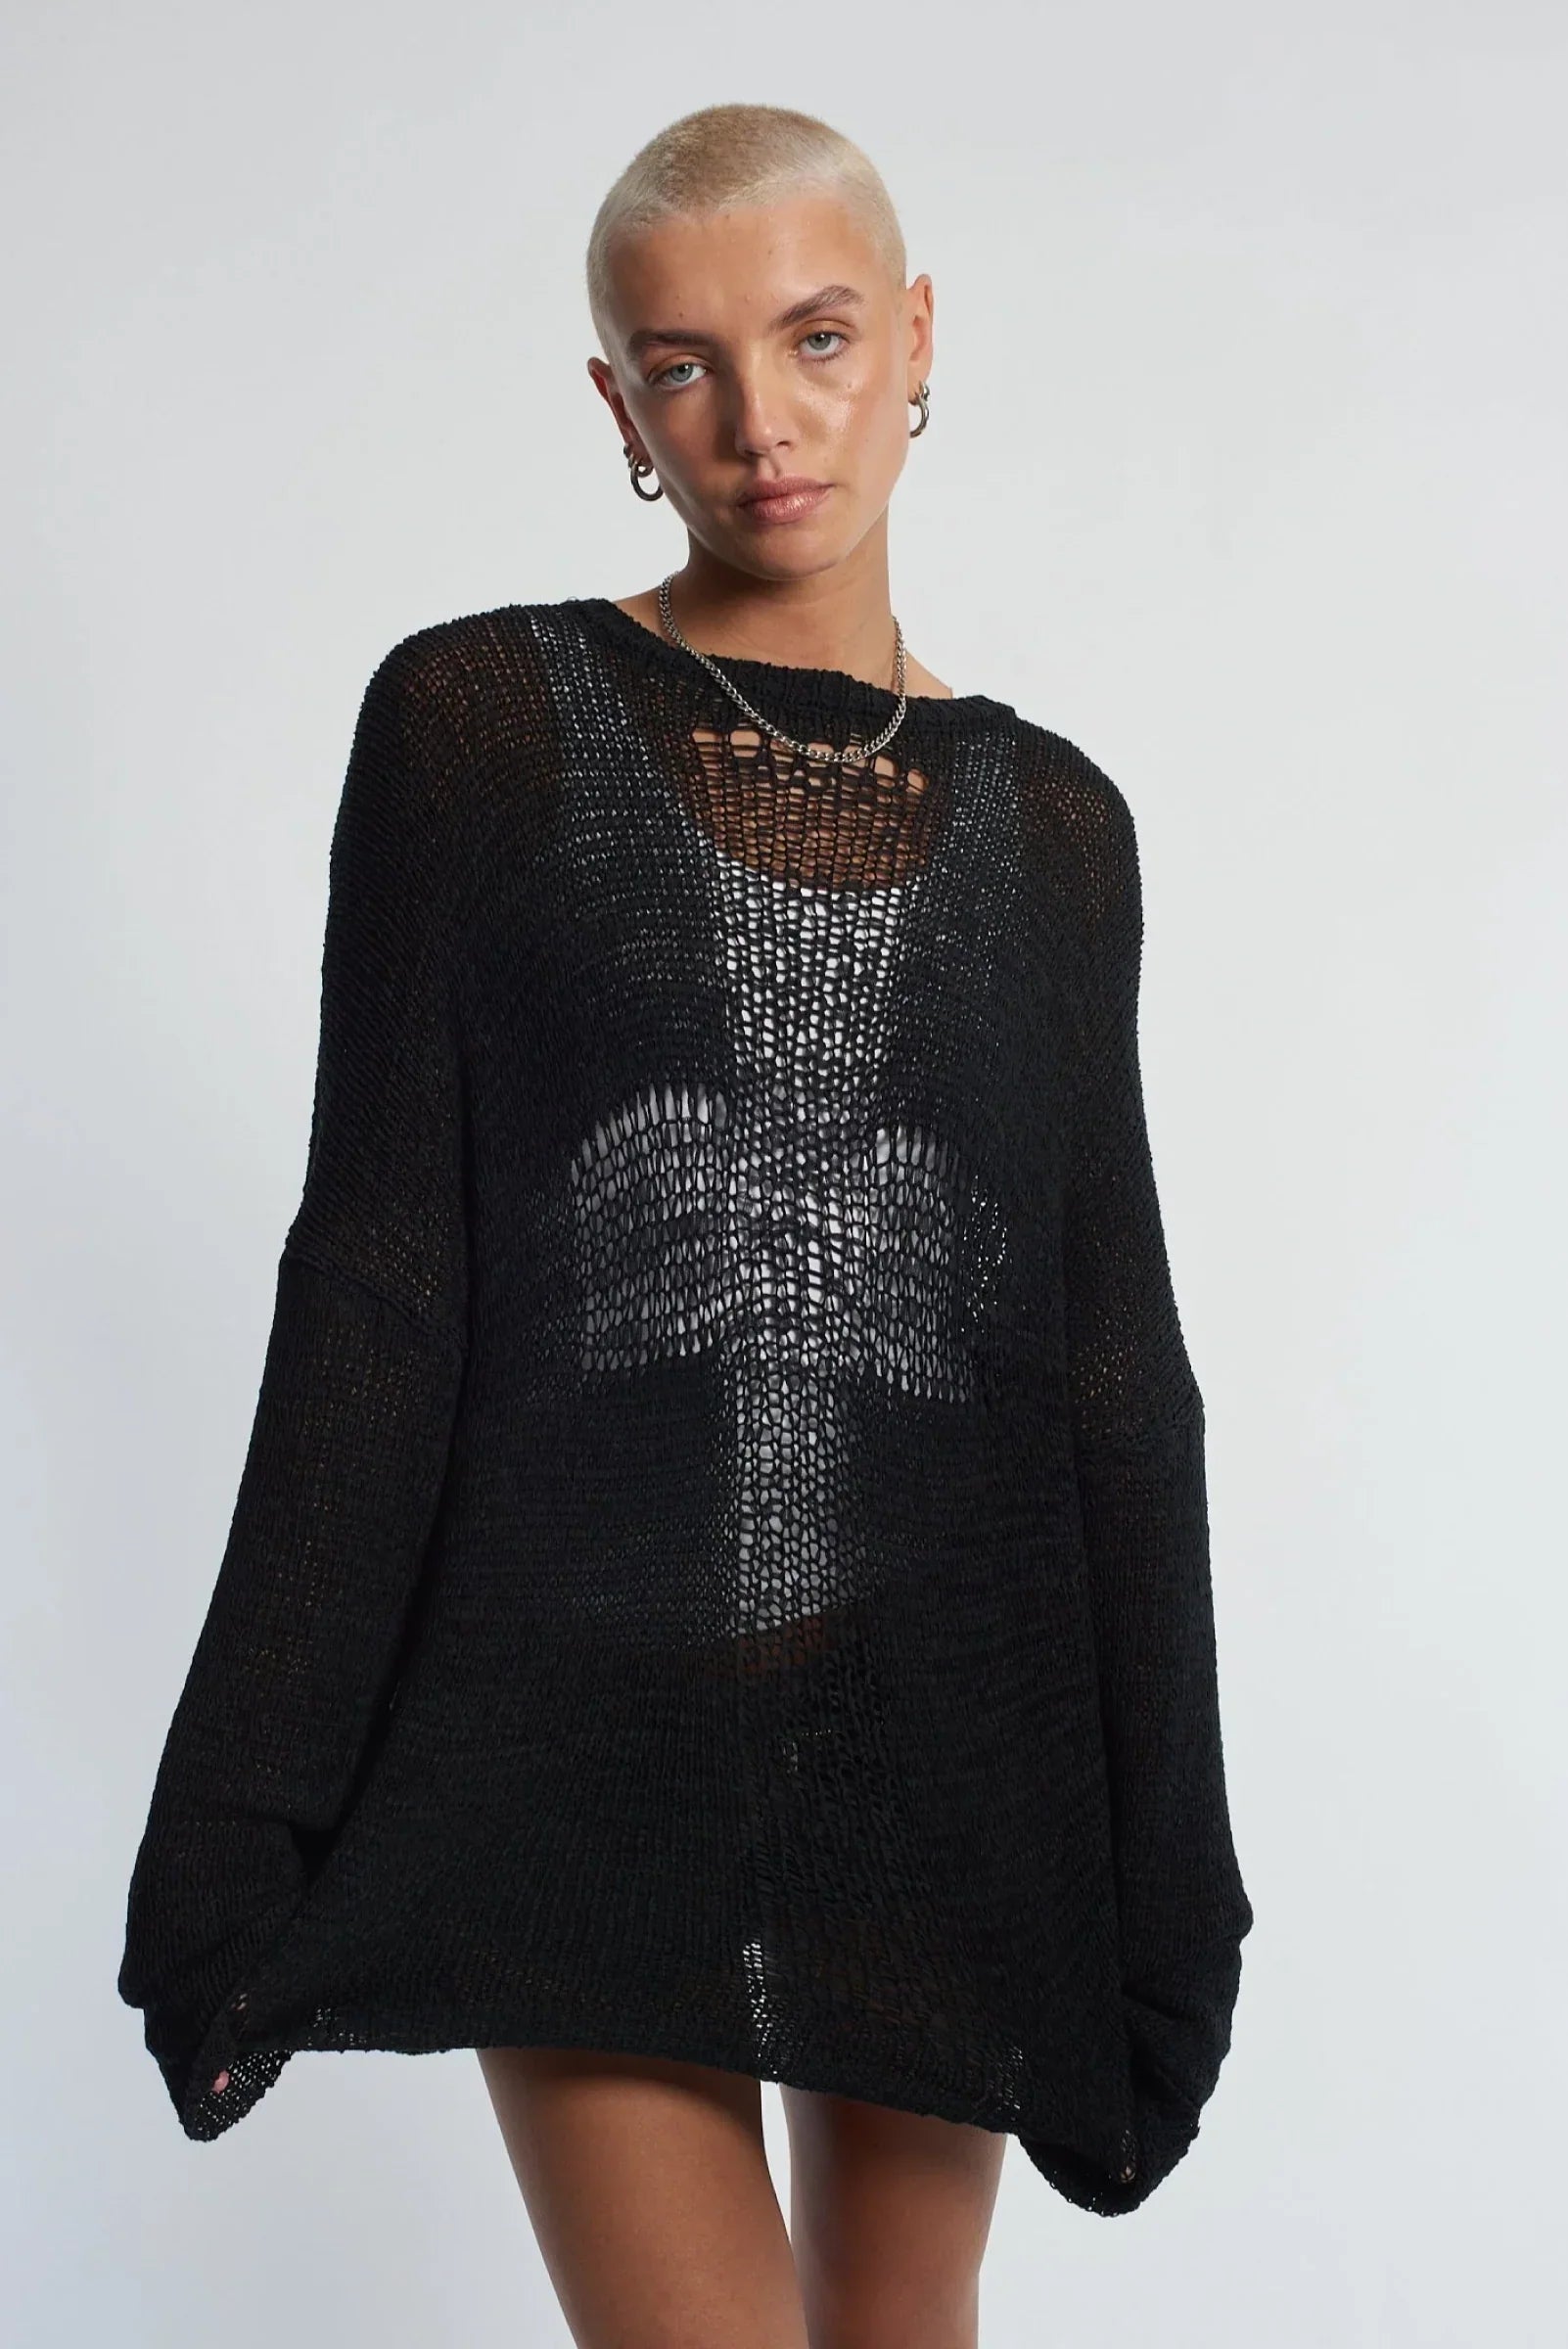 BLACK CROSS LADDER SUMMER KNIT JUMPER - EXCLUSIVE Knitwear from THE RAGGED PRIEST - Just $74.00! SHOP NOW AT IAMINHATELOVE BOTH IN STORE FOR CYPRUS AND ONLINE WORLDWIDE